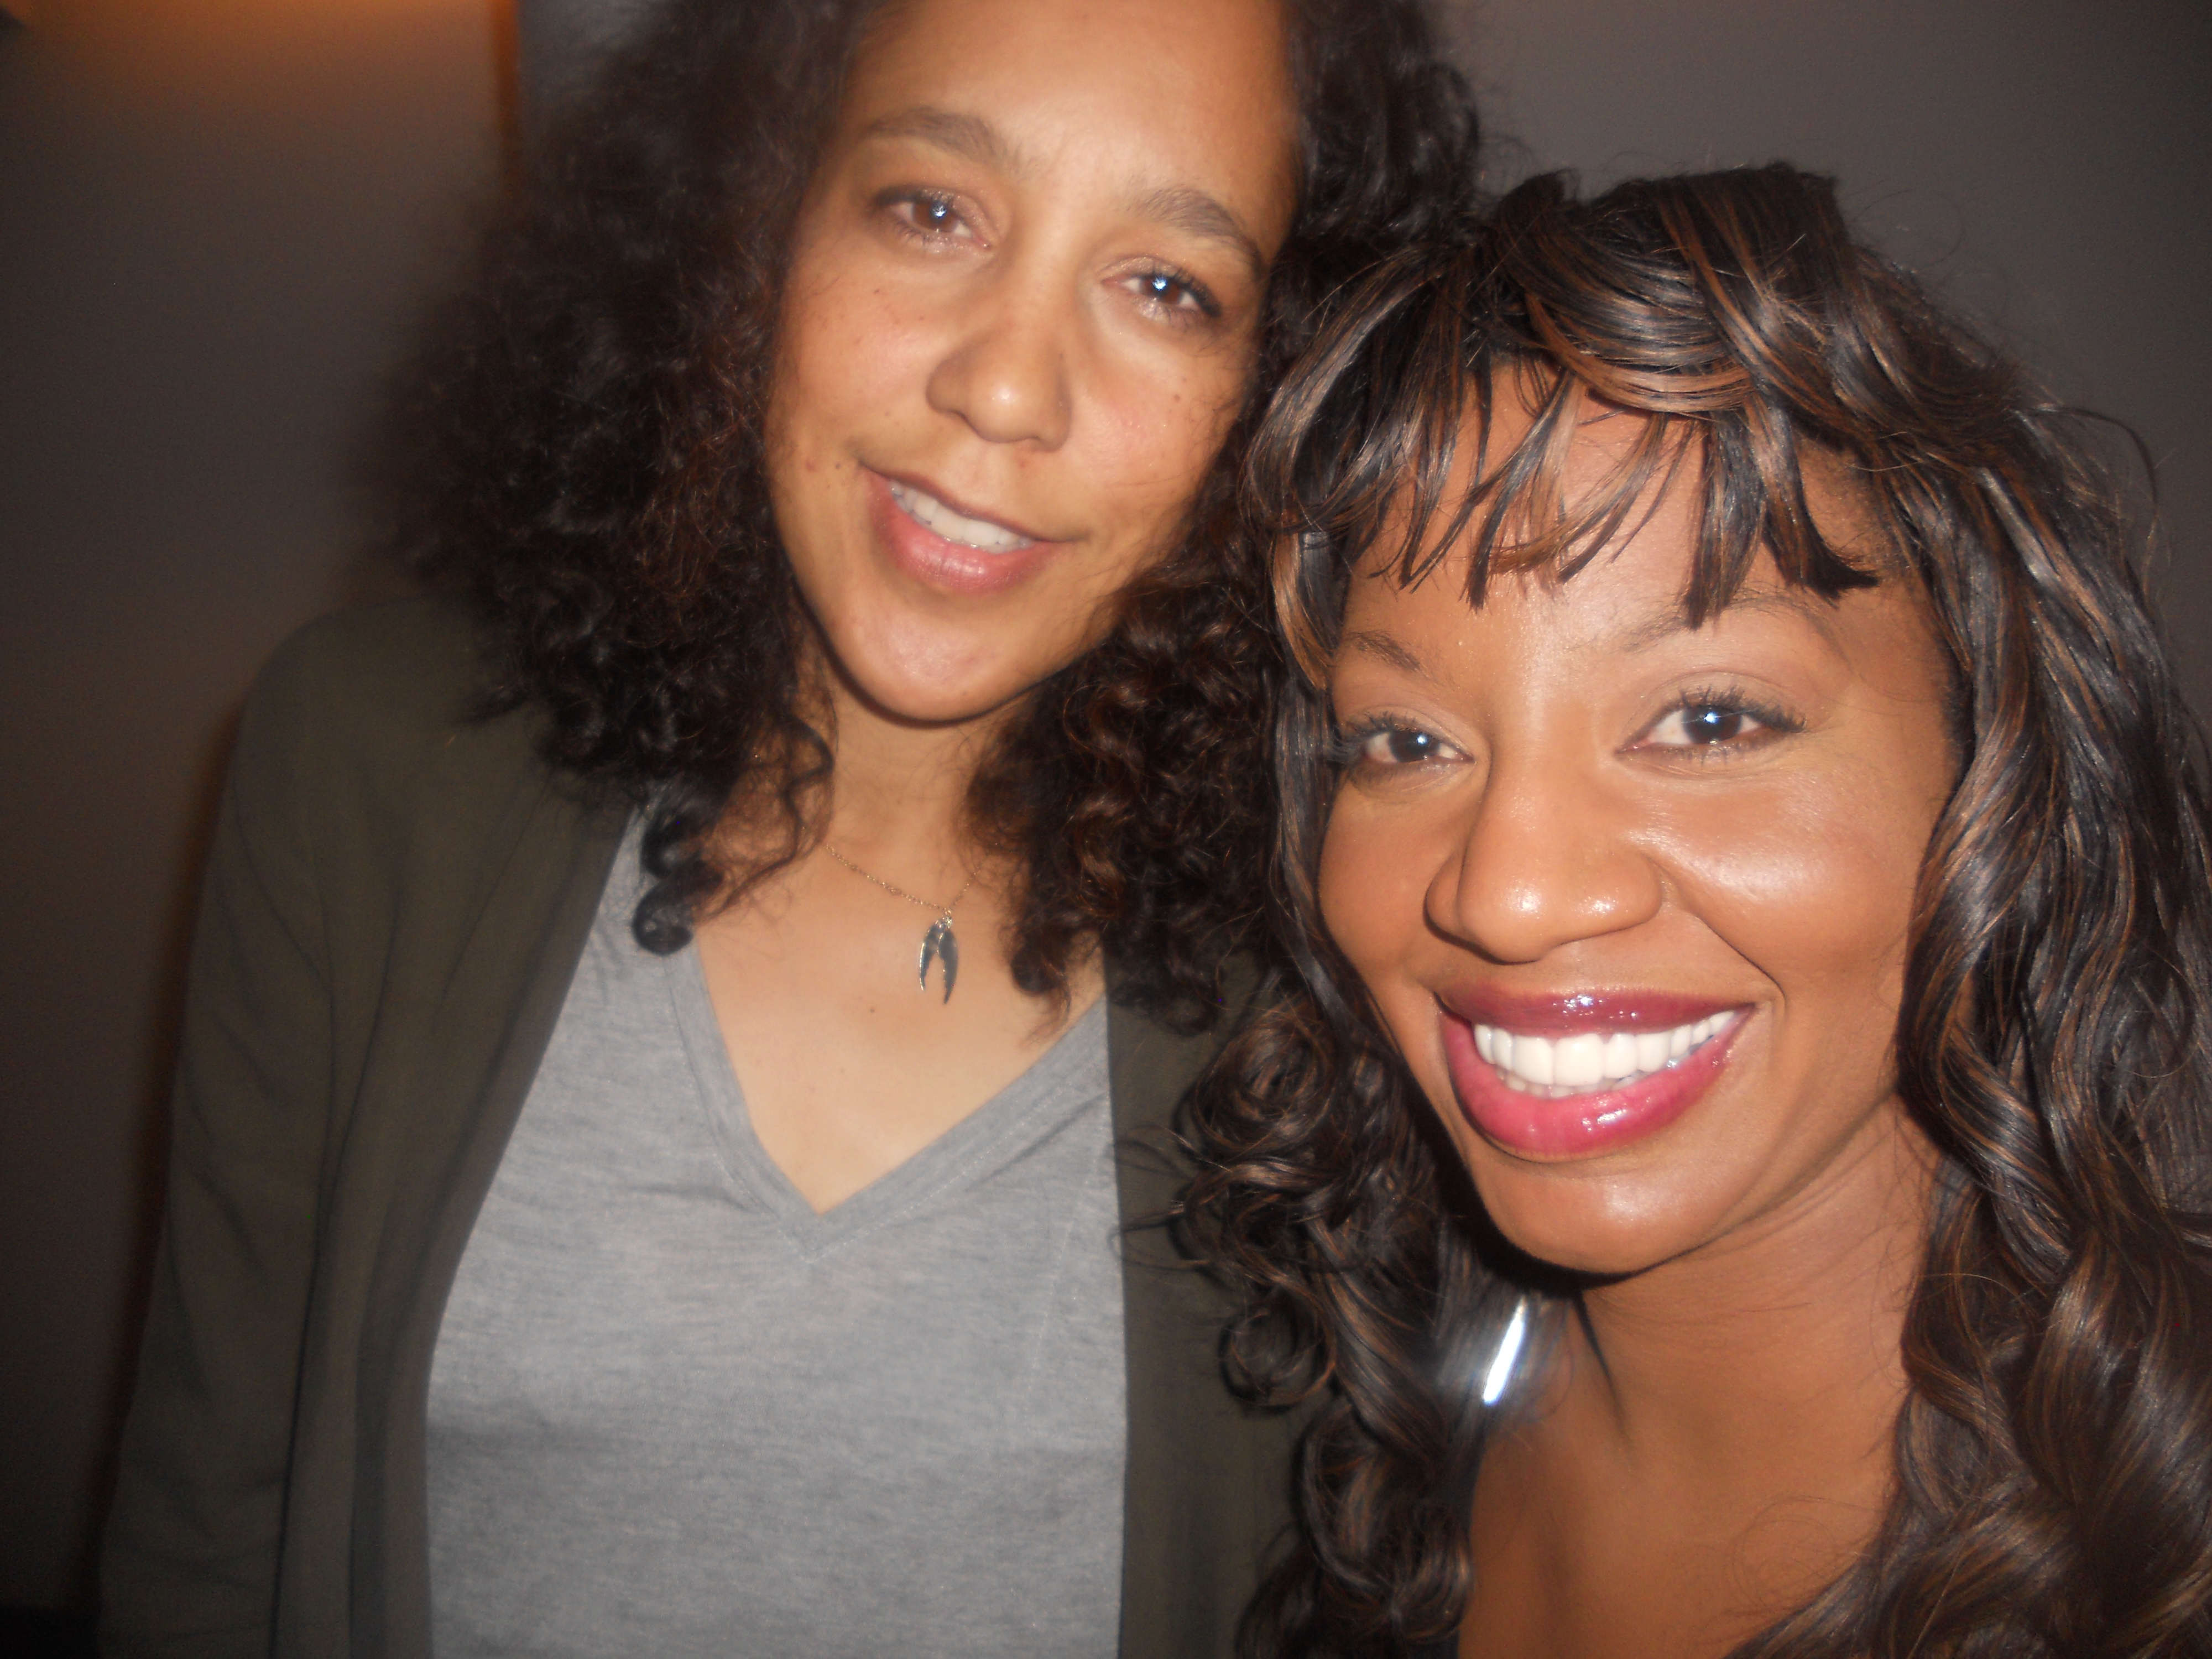 Nicole & director Gina Prince-Bythewood at the private screening of Beyond the Lights